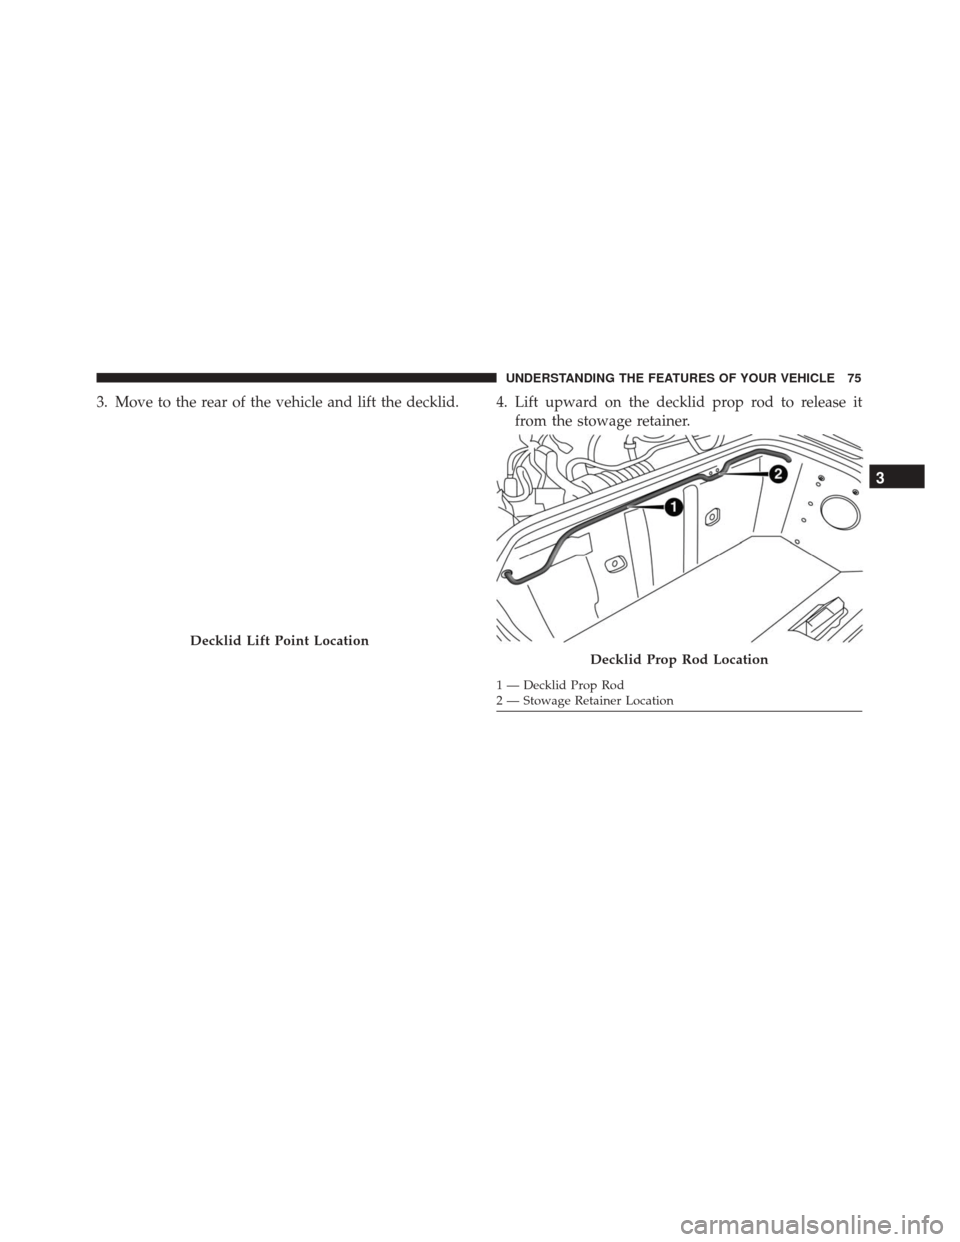 Alfa Romeo 4C Spider 2017 Manual PDF 3. Move to the rear of the vehicle and lift the decklid. 4. Lift upward on the decklid prop rod to release itfrom the stowage retainer.
Decklid Lift Point Location
Decklid Prop Rod Location
1 — Deck